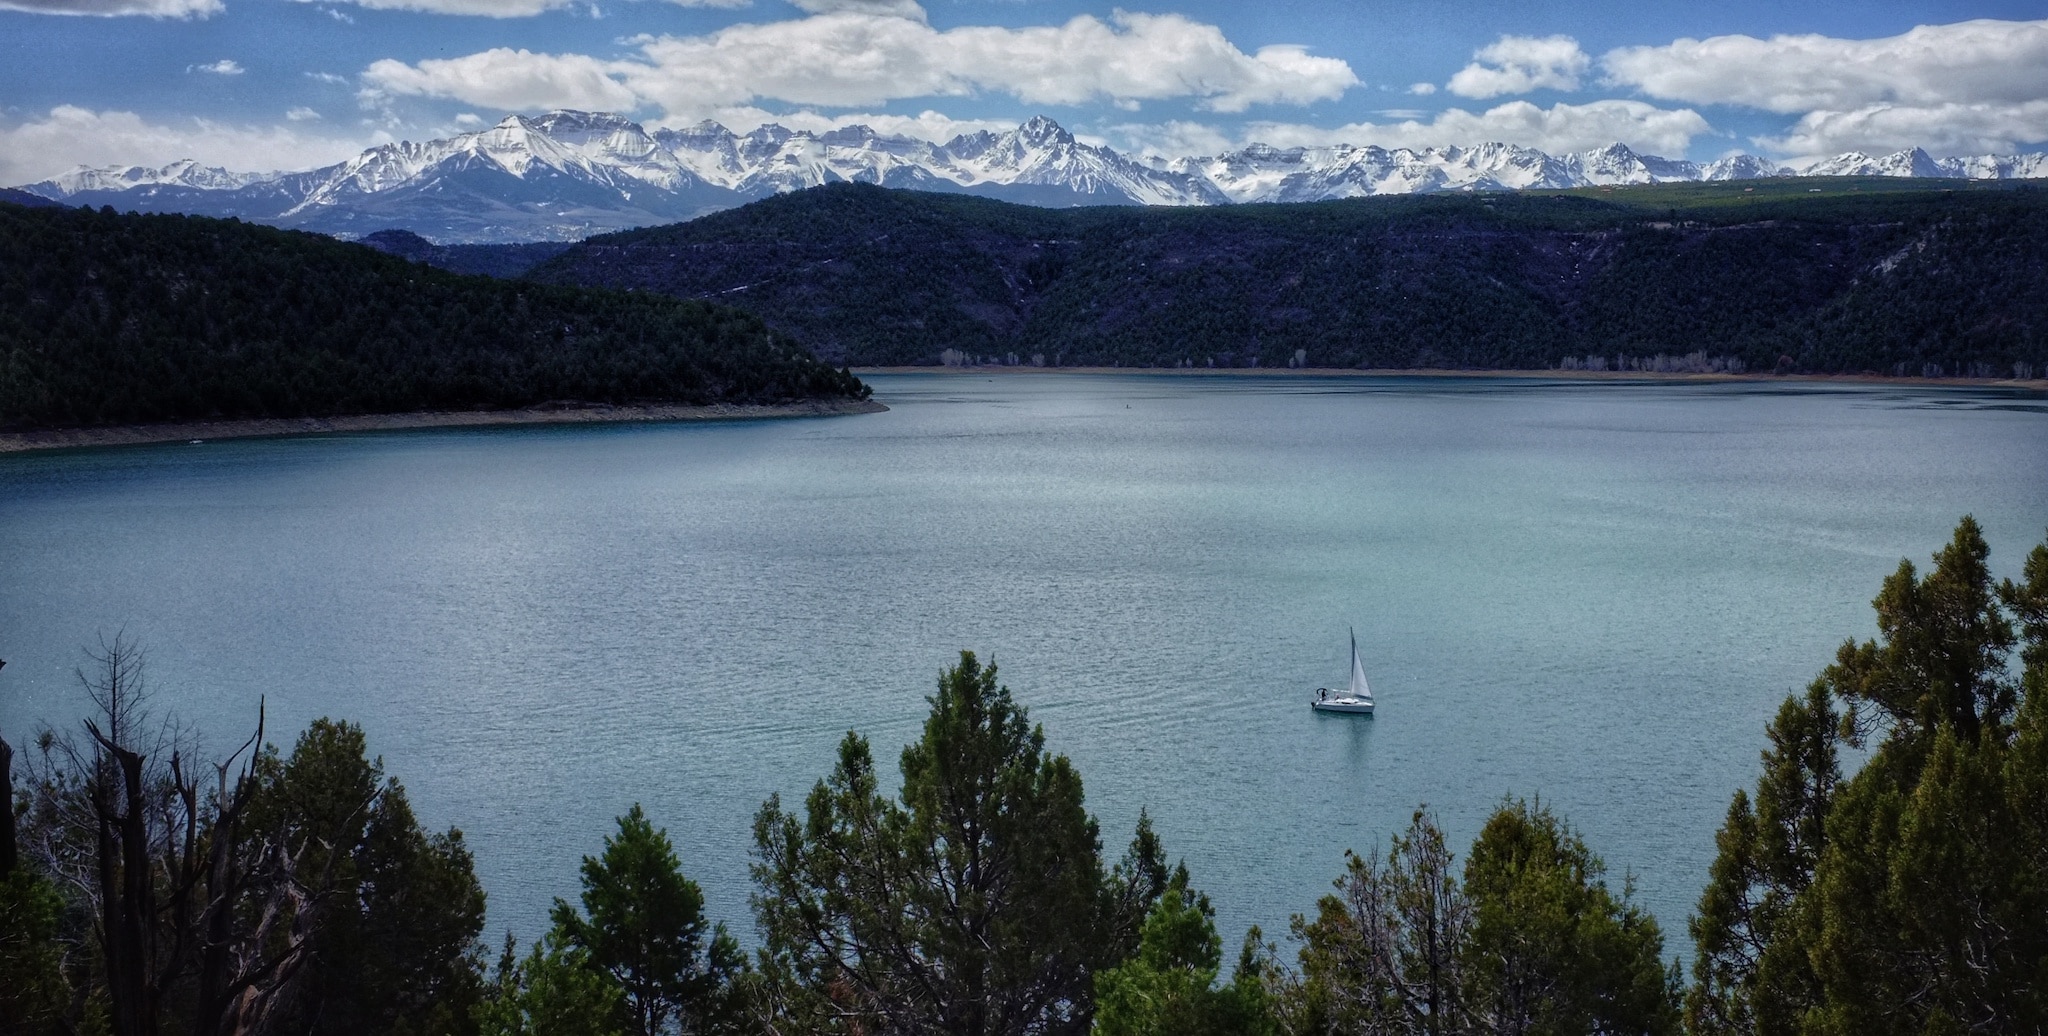 A large reservoir outside of Ridgway, Colorado with snowcapped peaks in the distance.